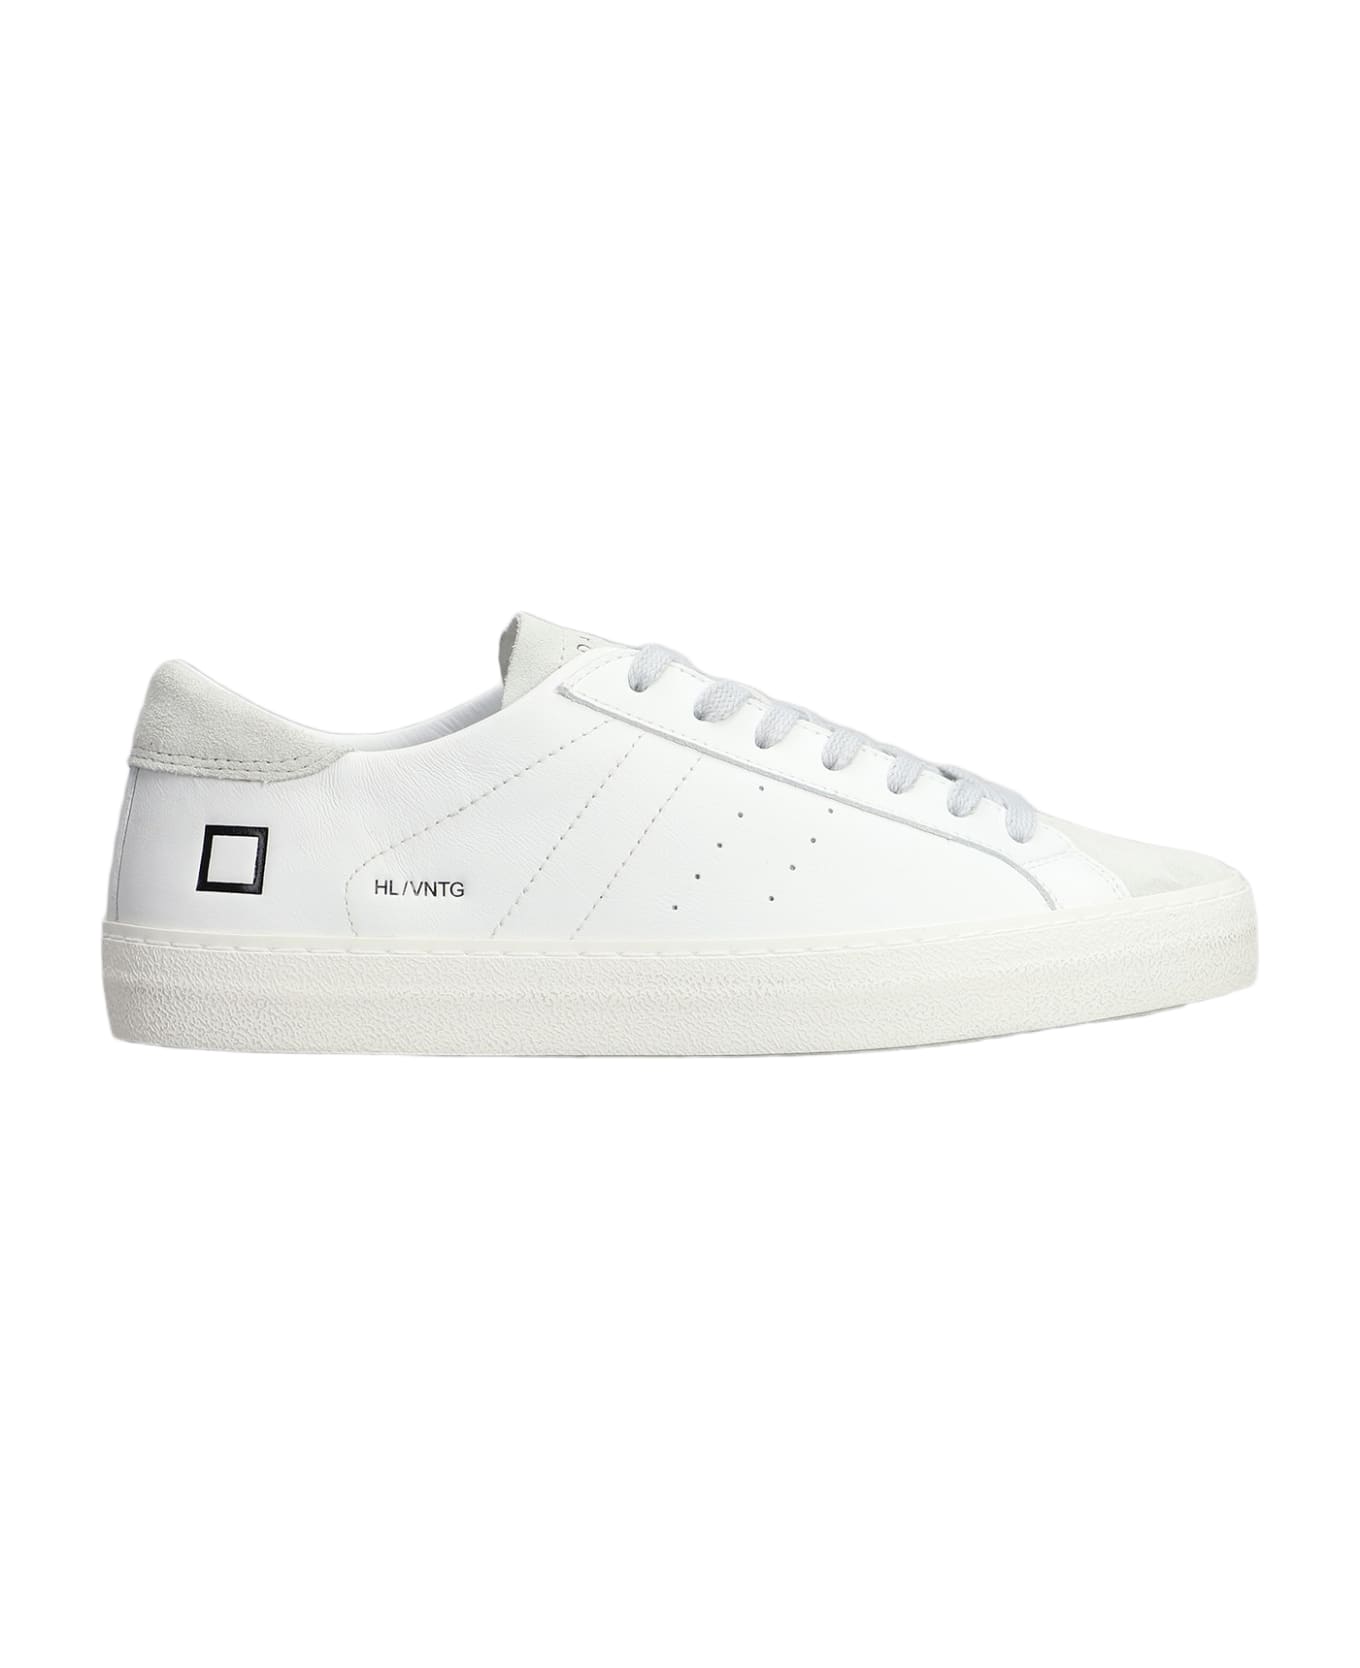 D.A.T.E. Hill Low Sneakers In White Suede And Leather - white